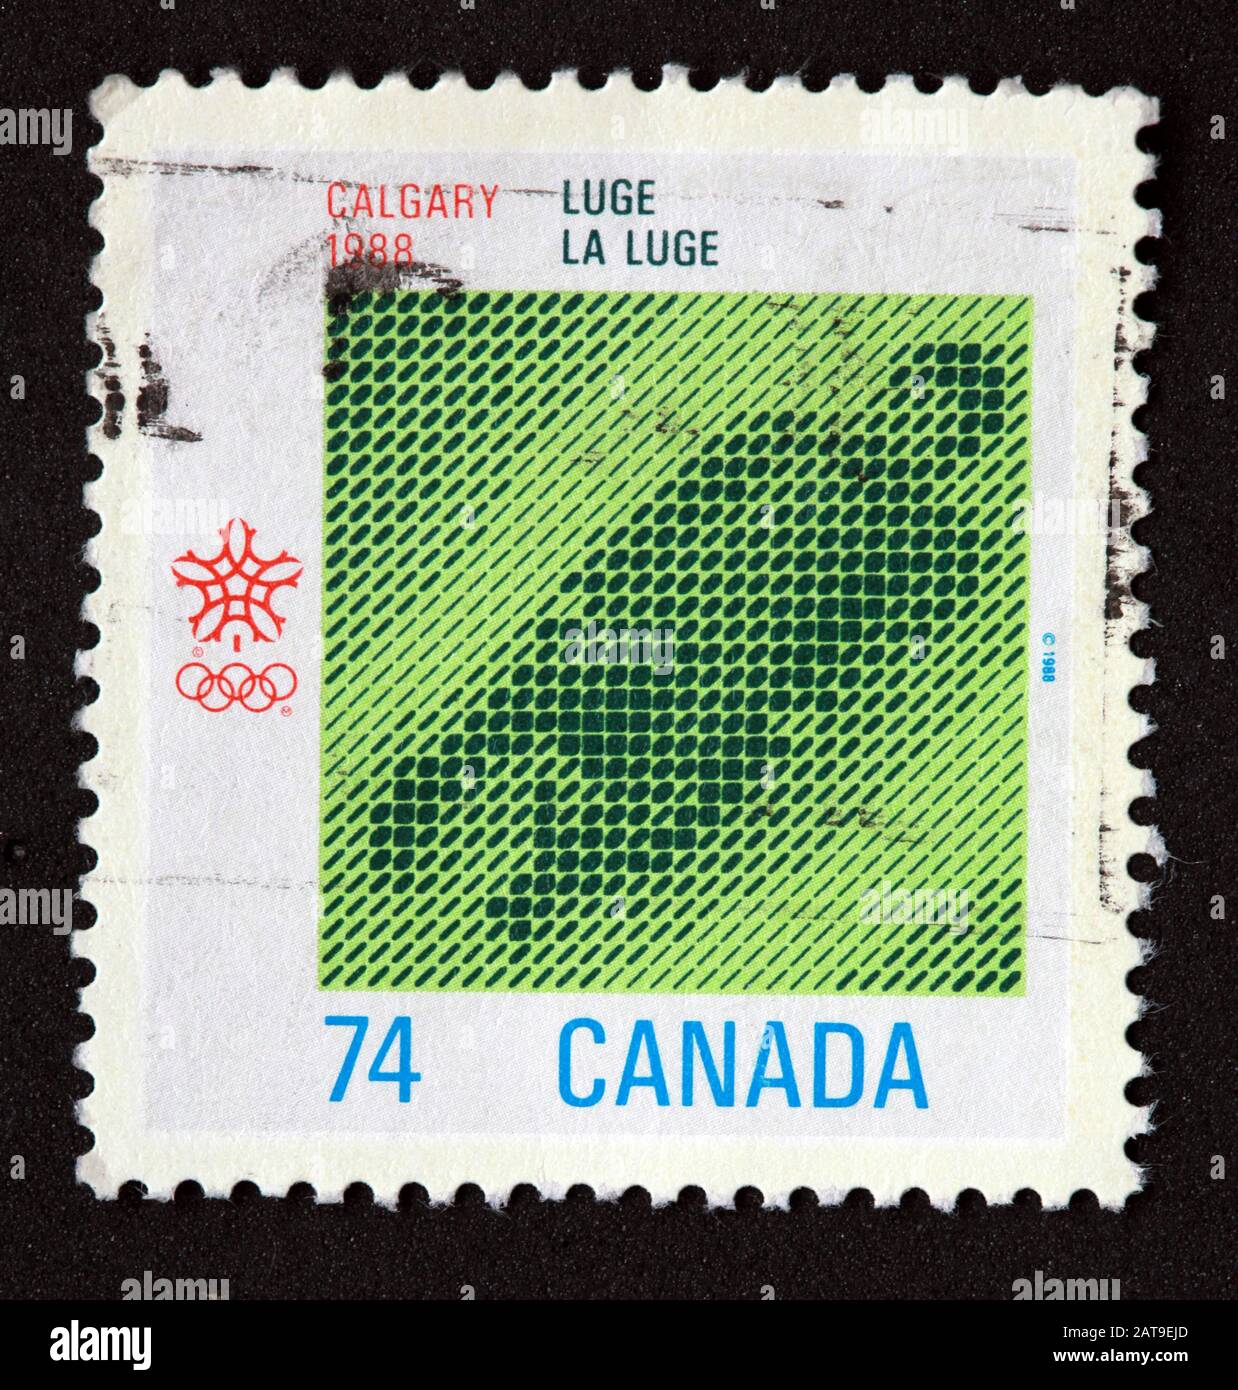 Canadian Stamp, Canada Stamp, Canada Post,used stamp, 1988 , Calgary 1988, luge, la luge, 74, 74c Stock Photo